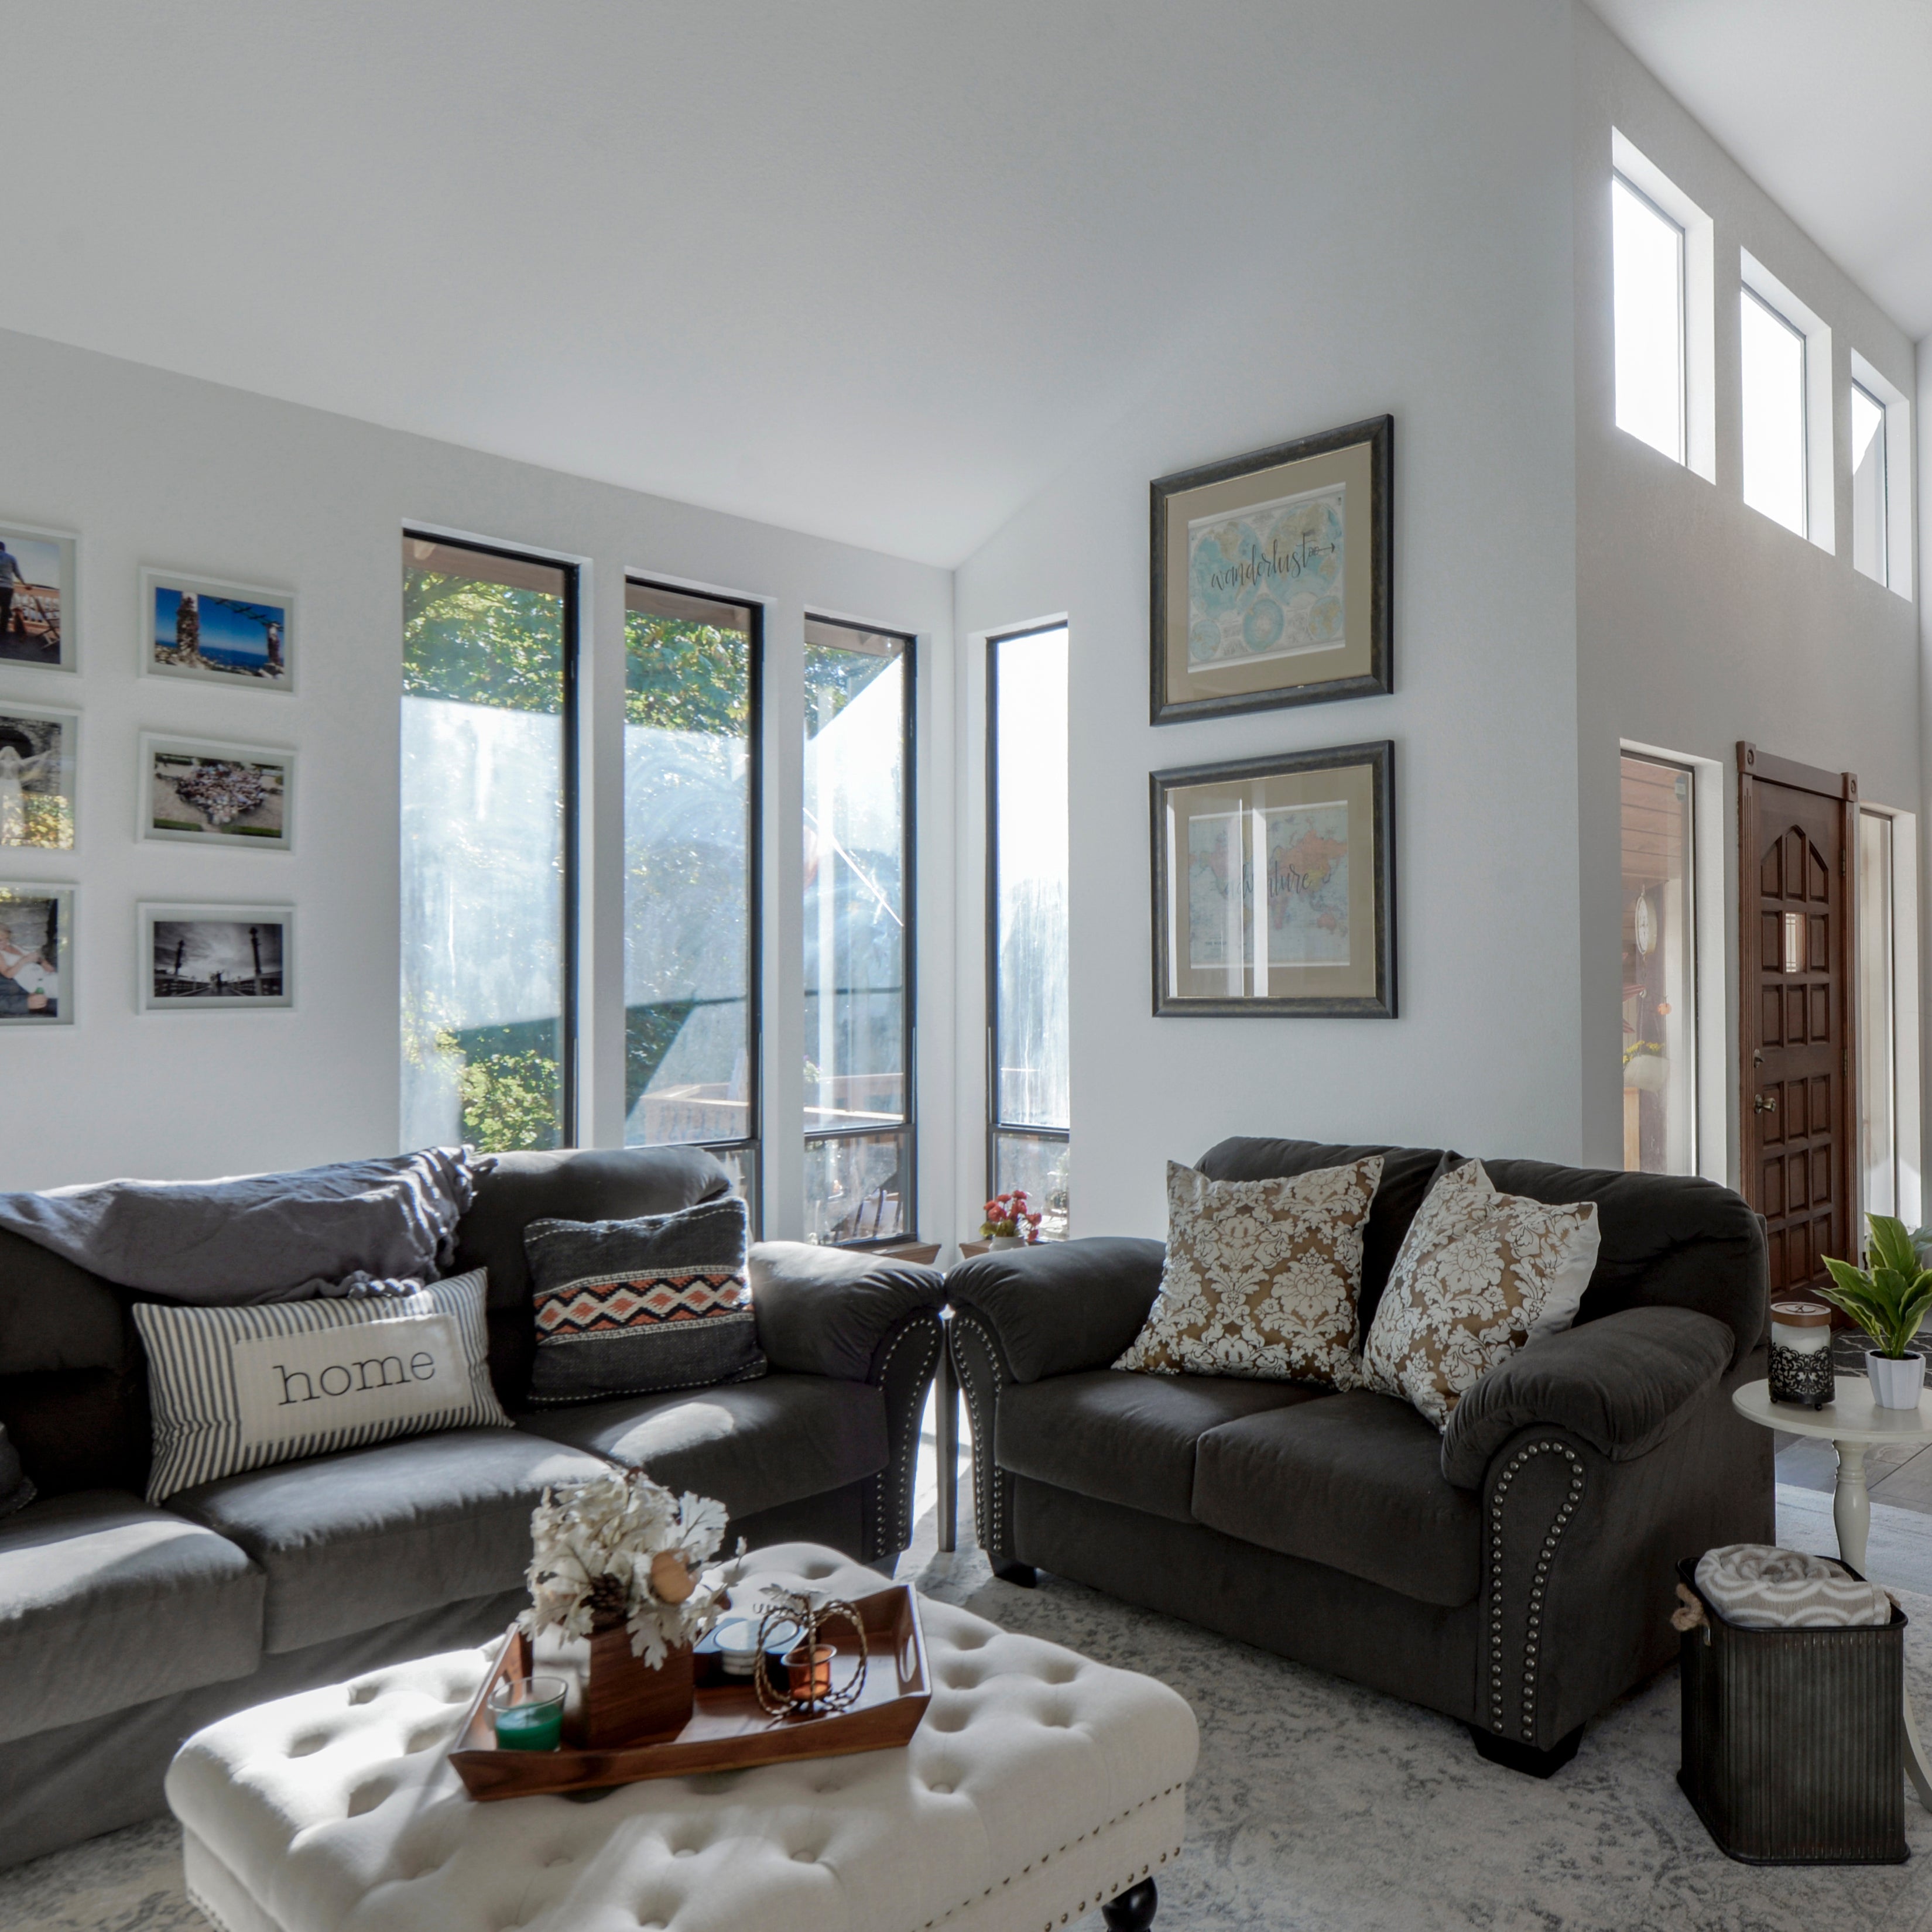 An interior photo of a professionally designed Transitional decor style living room with dark gray couches, tall windows, and other Transitional style decorations